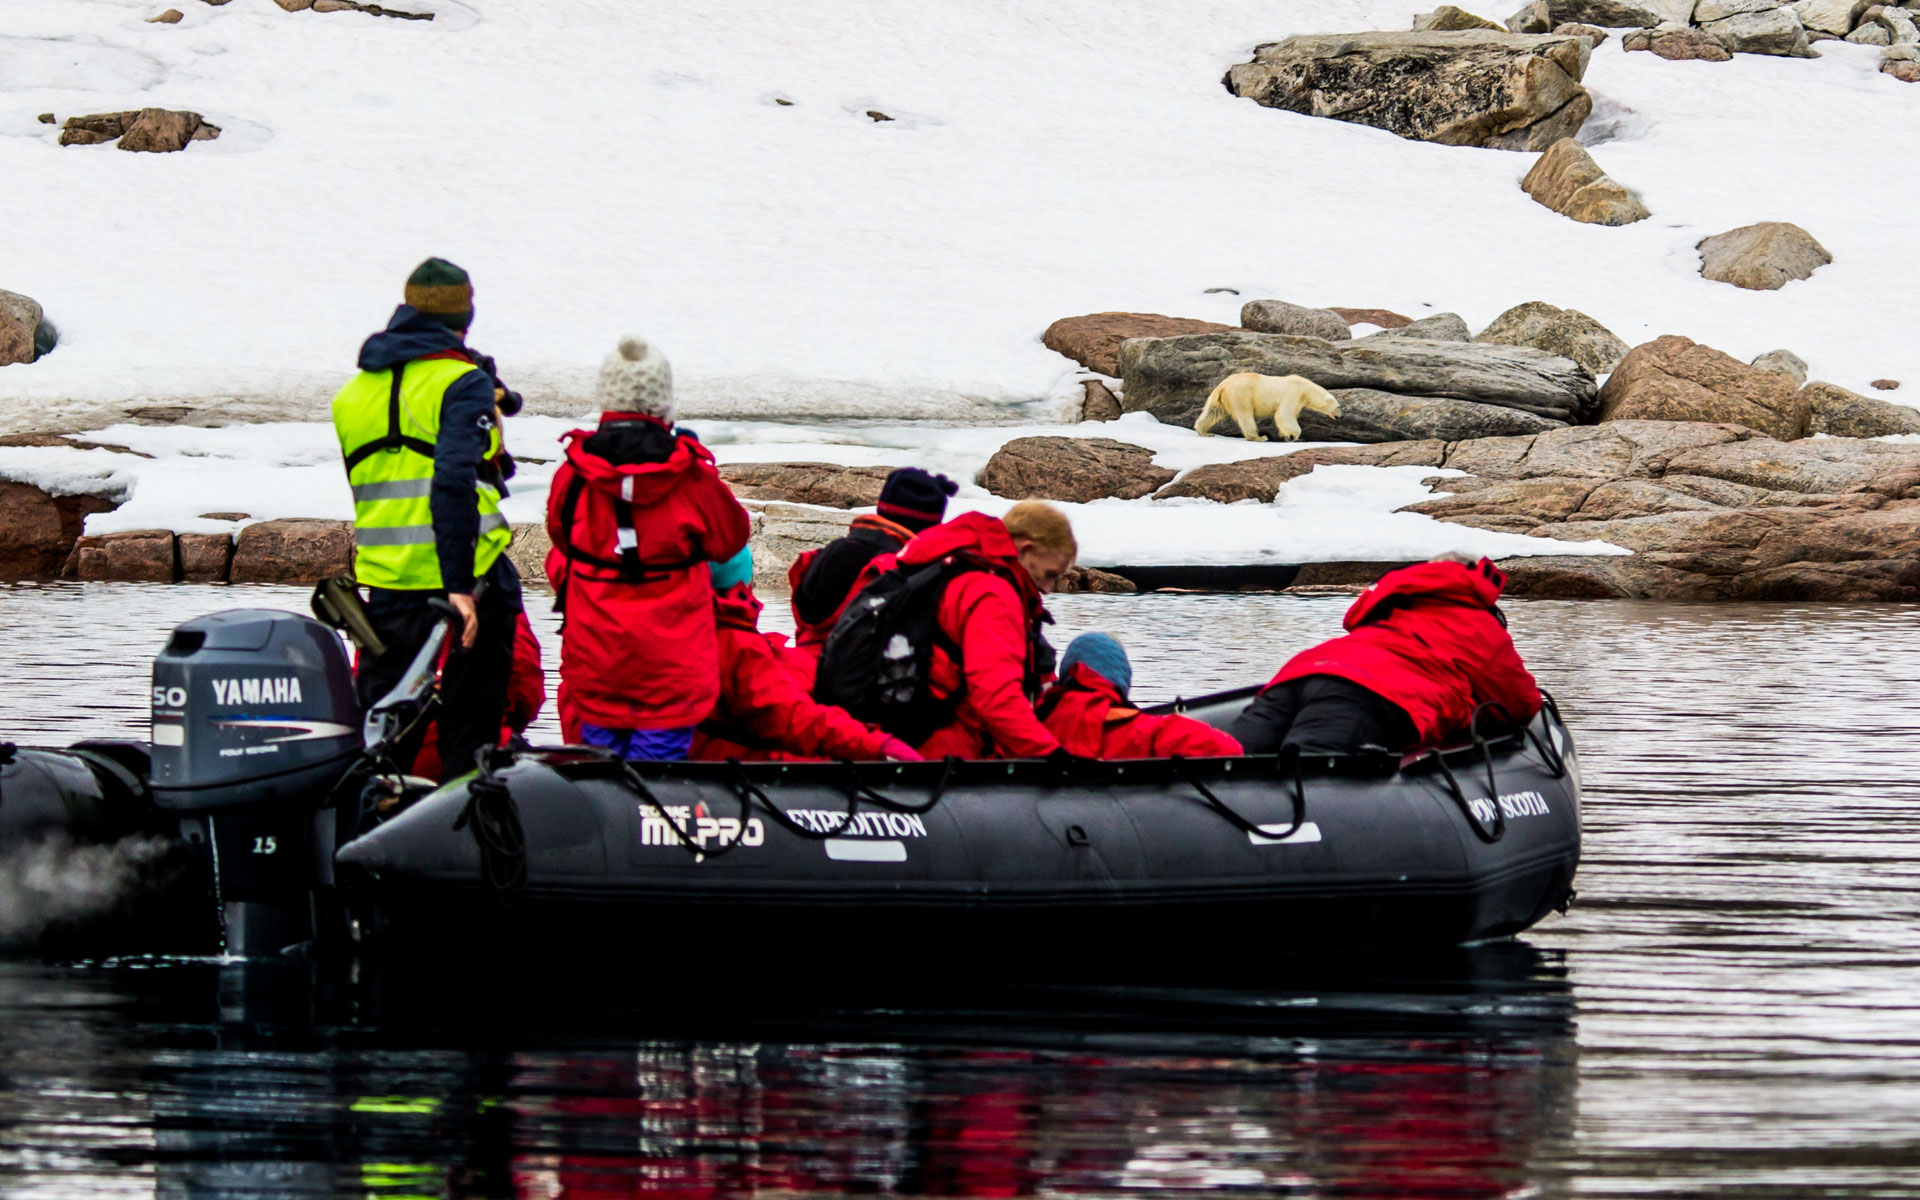 Travelers in red jackets sit in a zodiac that's cruising along a snowy and rocky shoreline with a white polar bear walking along the shore.